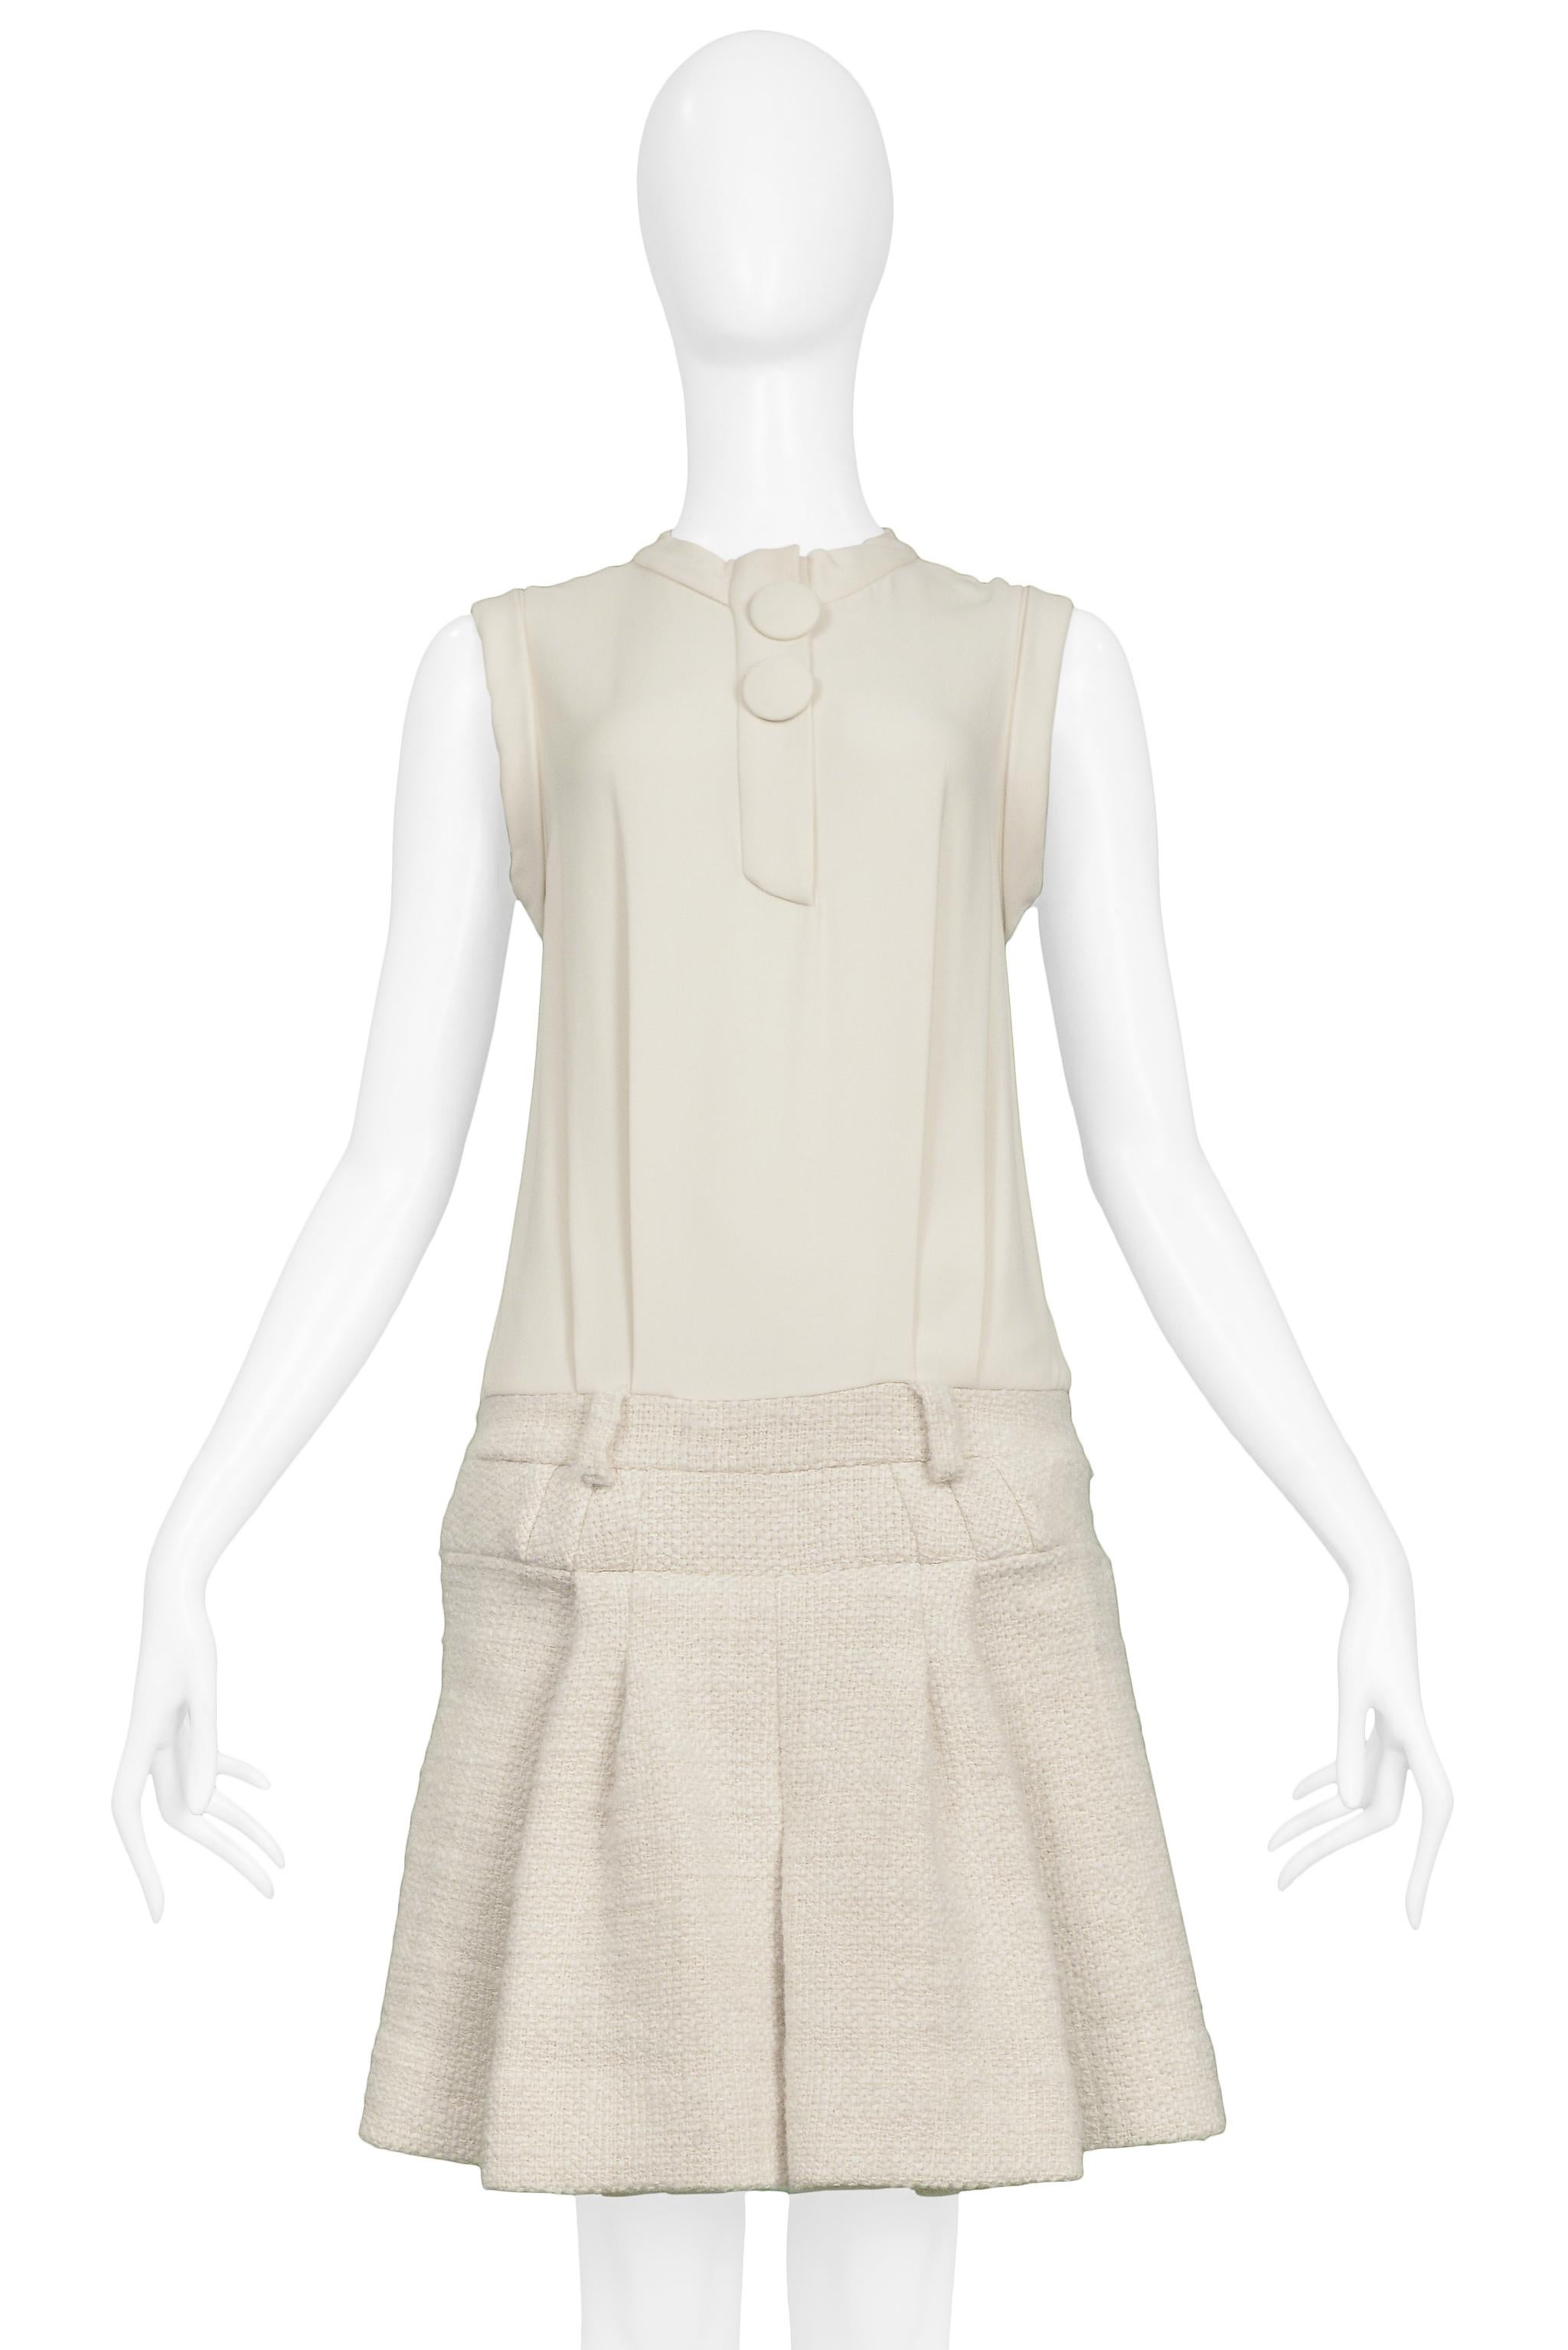 Balenciaga By Ghesquiere Off-White Box Pleat Dress 2006 In Excellent Condition For Sale In Los Angeles, CA